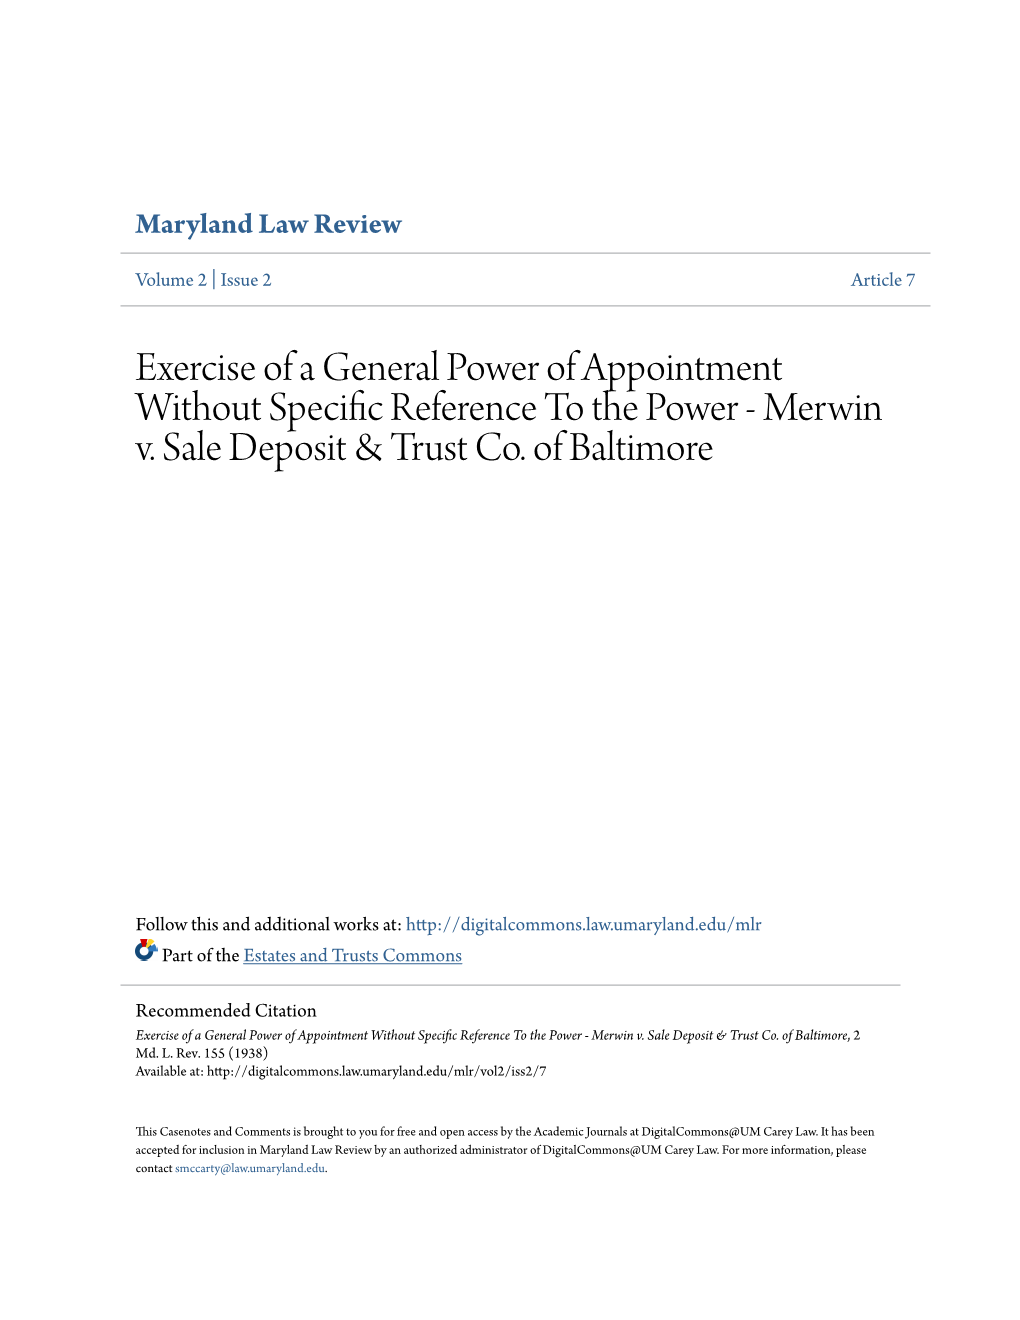 Exercise of a General Power of Appointment Without Specific Reference to the Power - Merwin V